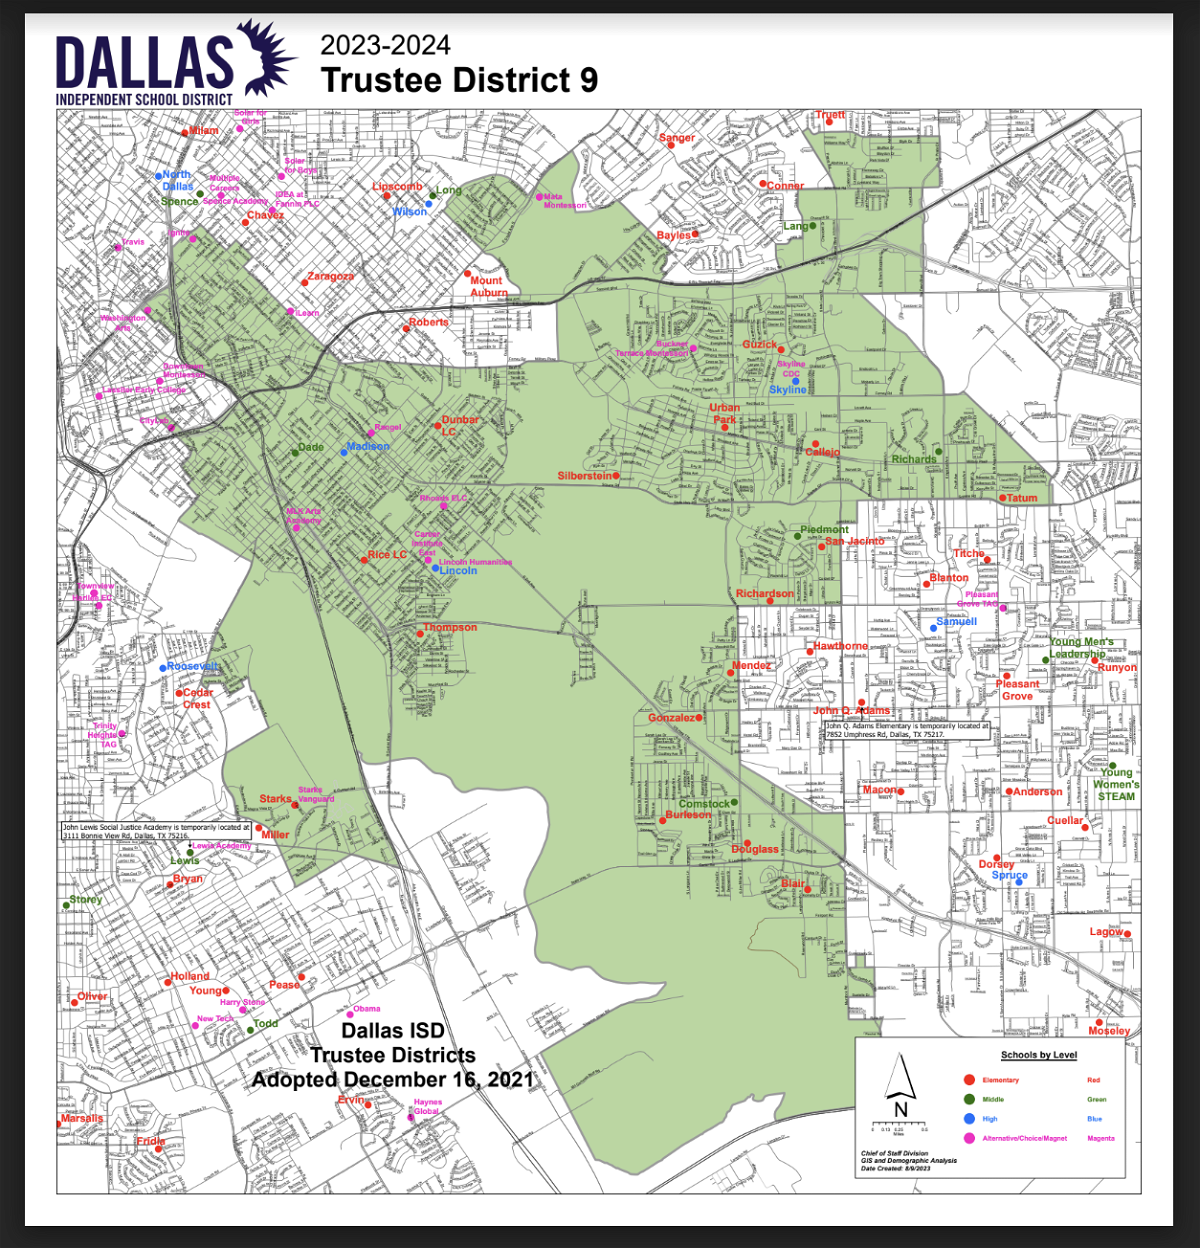 Here’s your cheat sheet for the Dallas ISD District 9 election